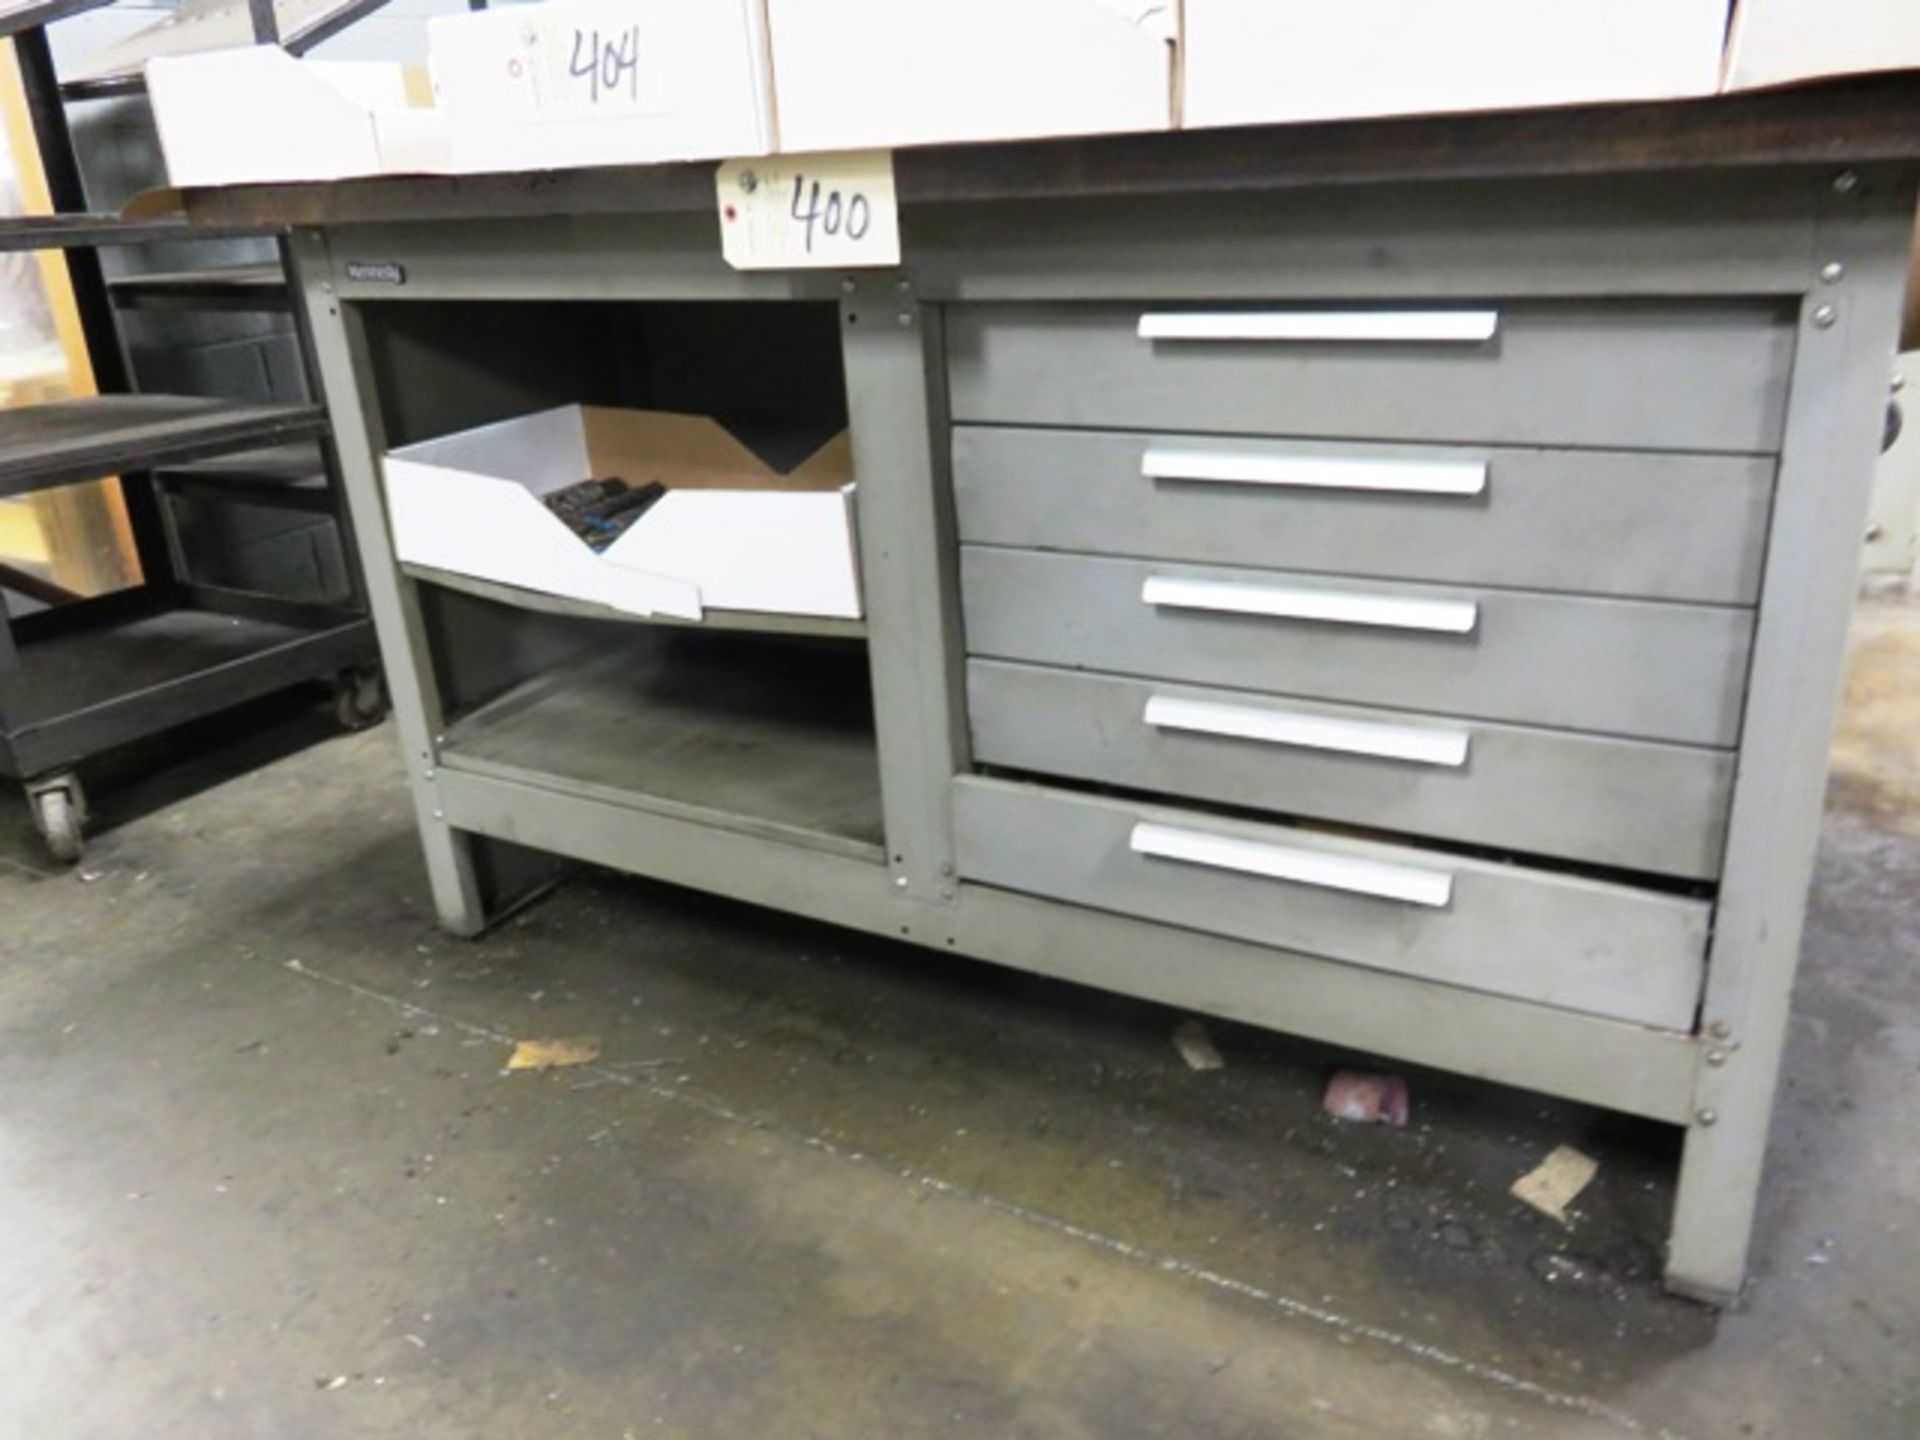 Kennedy 5 Drawer Tool Cabinet (no removal until Friday, 12-9)